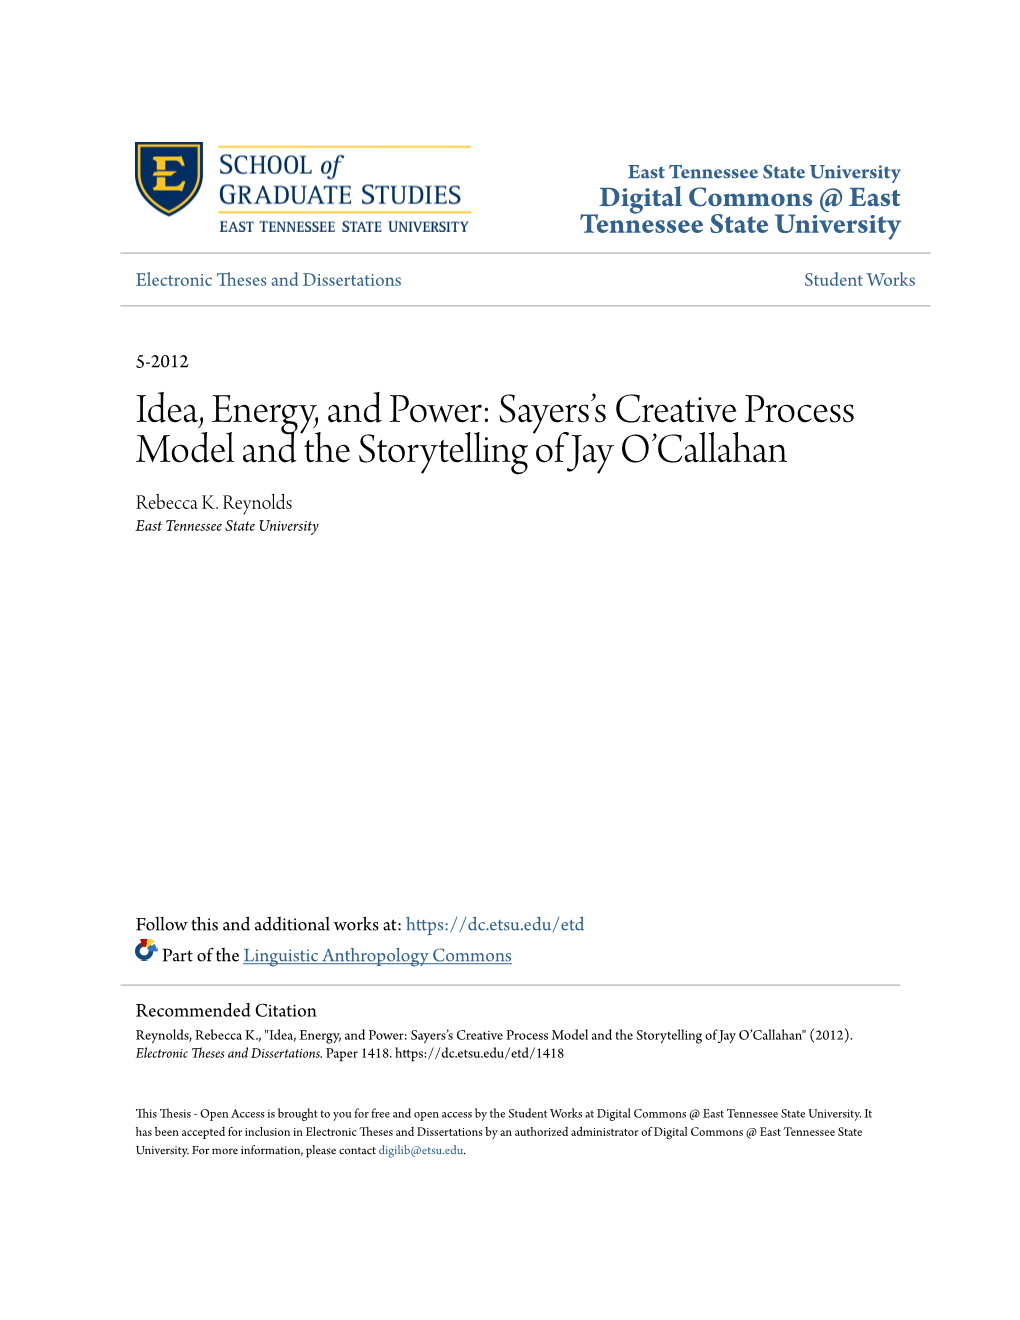 Sayers's Creative Process Model and the Storytelling of Jay O'callahan